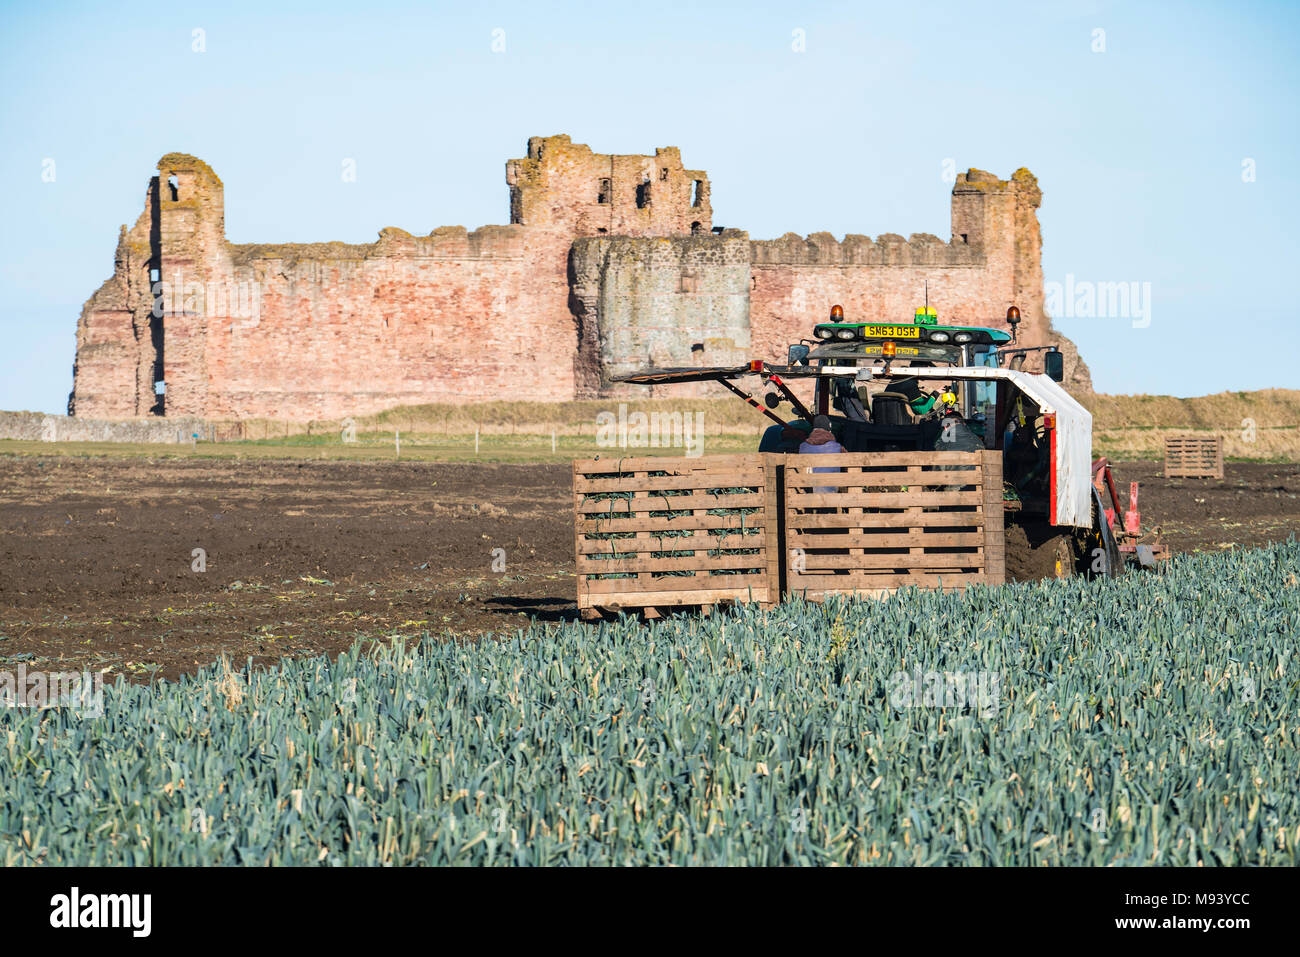 View of farm workers harvesting field of leeks in front of Tantallon Castle in East Lothian, Scotland, United Kingdom Stock Photo